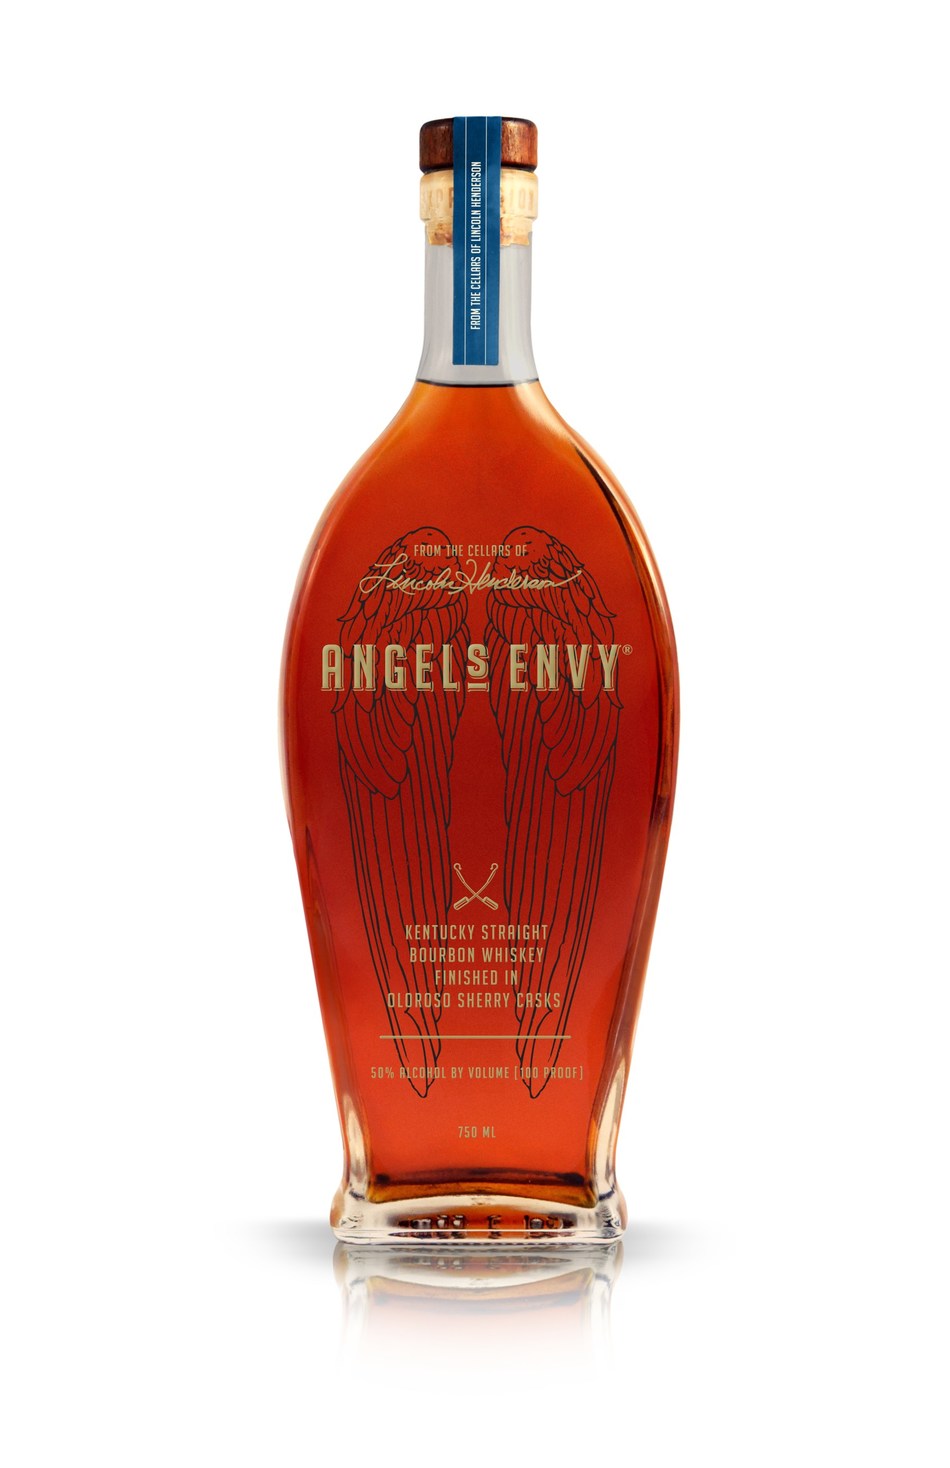 Angel’s Envy Kentucky Straight Bourbon Whiskey Finished in Oloroso Sherry Casks